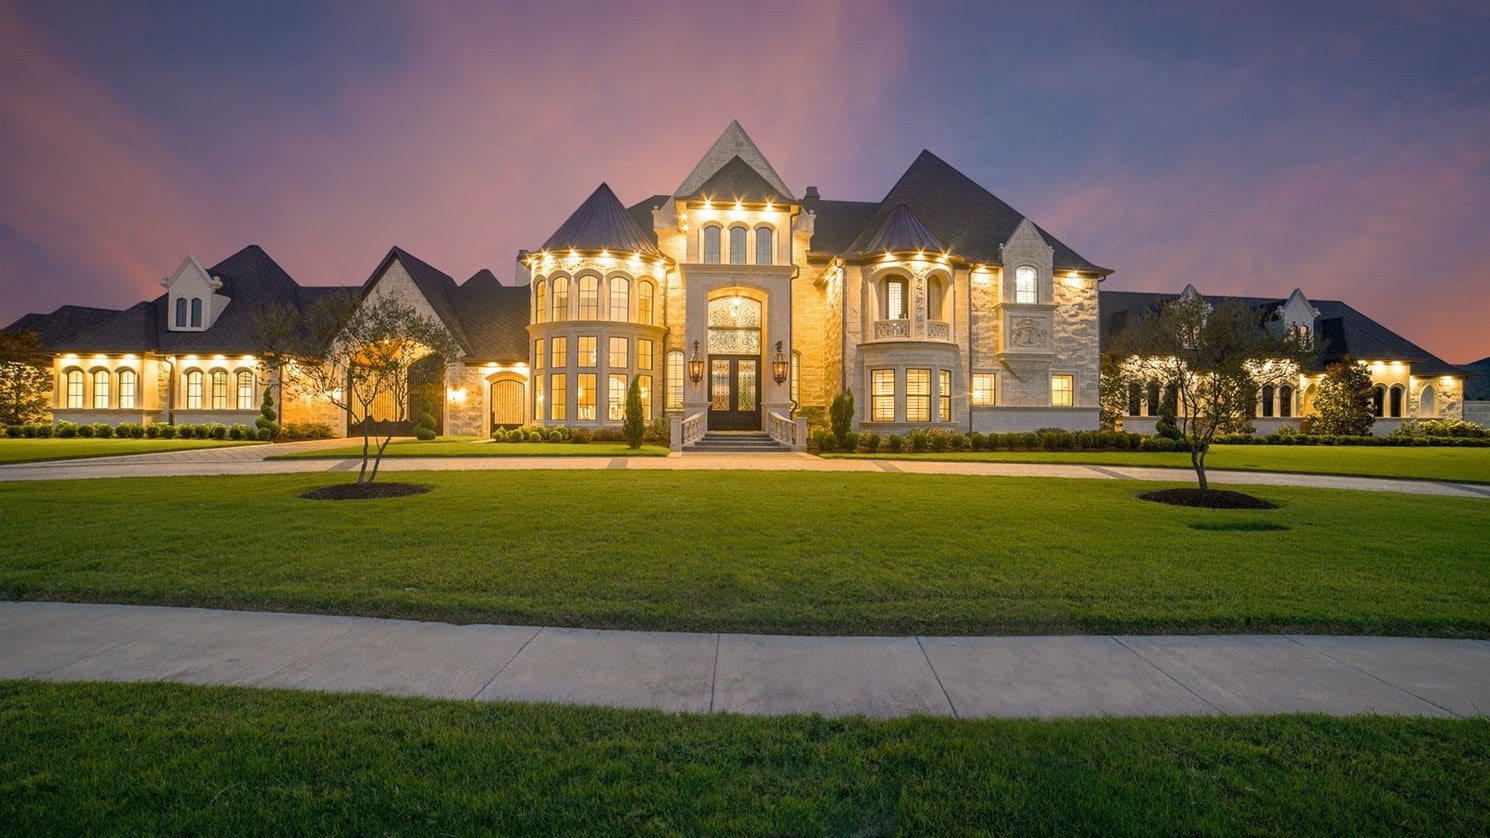 Curb appeal